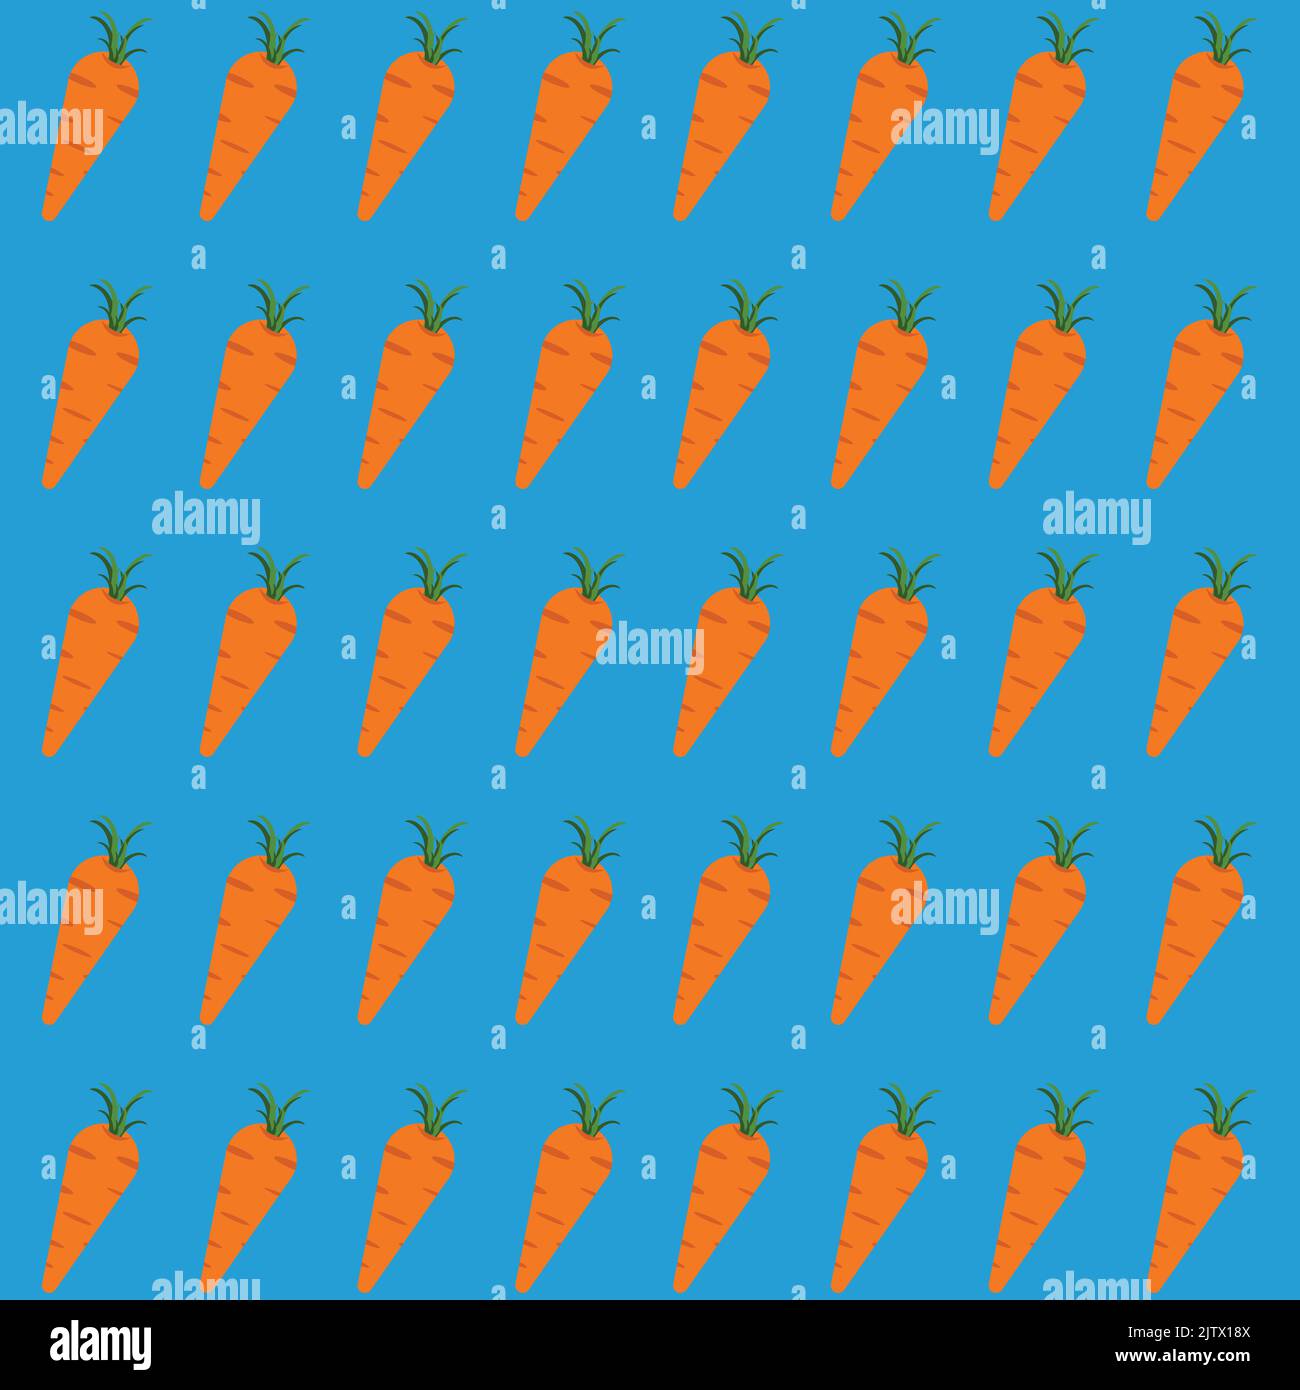 simple carrot repeating seamless pattern vector design illustration isolated on a square background Stock Vector